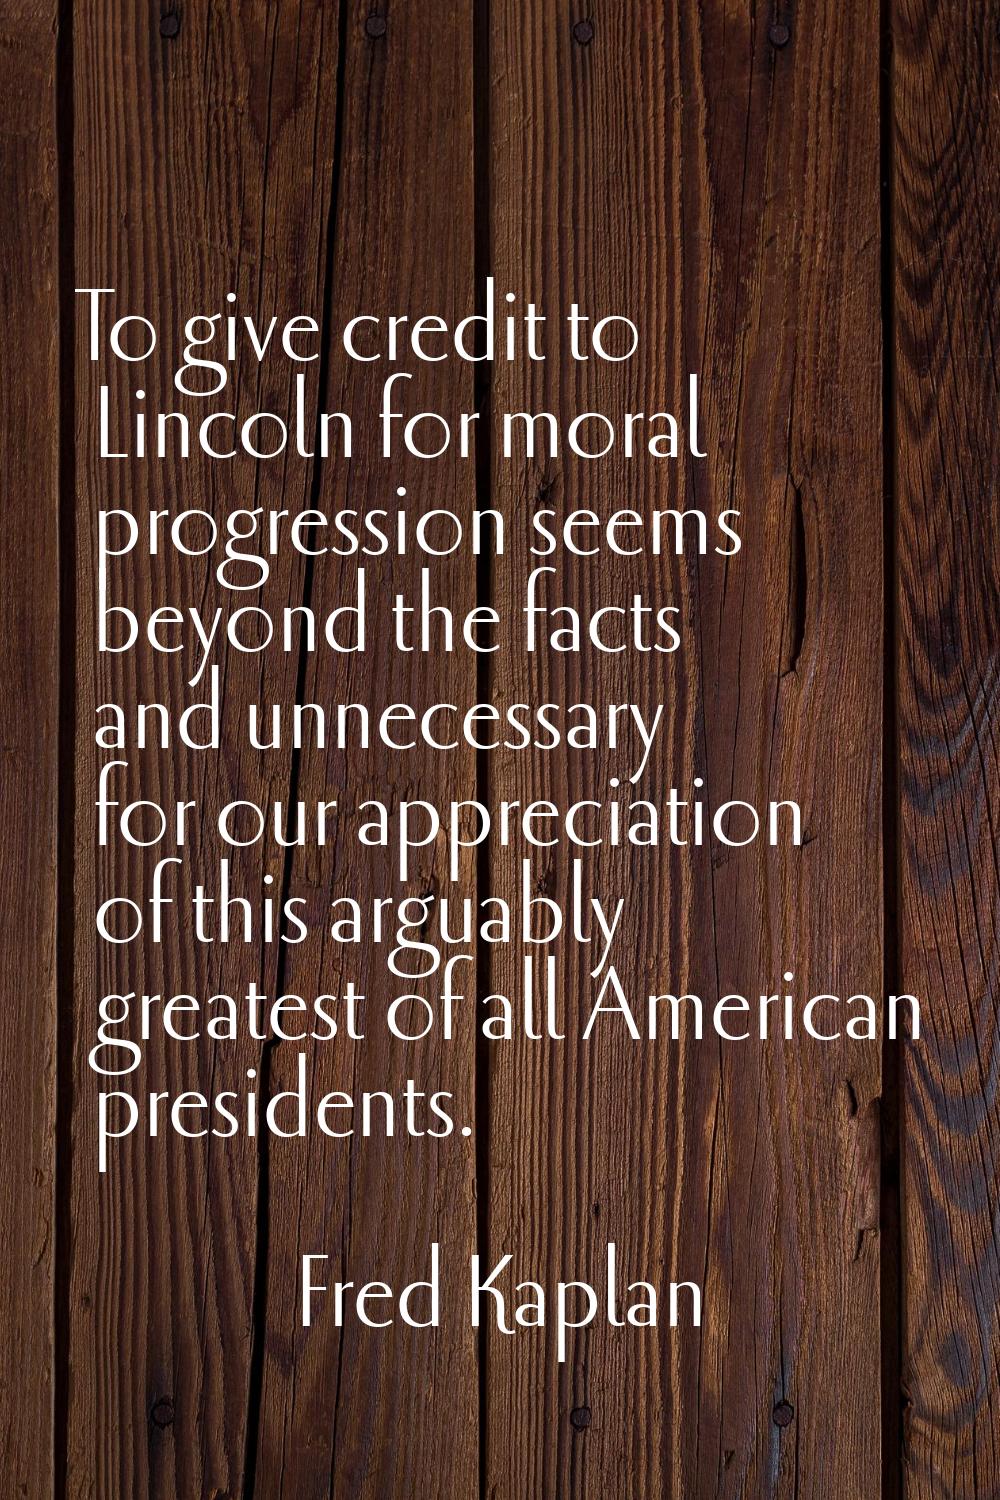 To give credit to Lincoln for moral progression seems beyond the facts and unnecessary for our appr